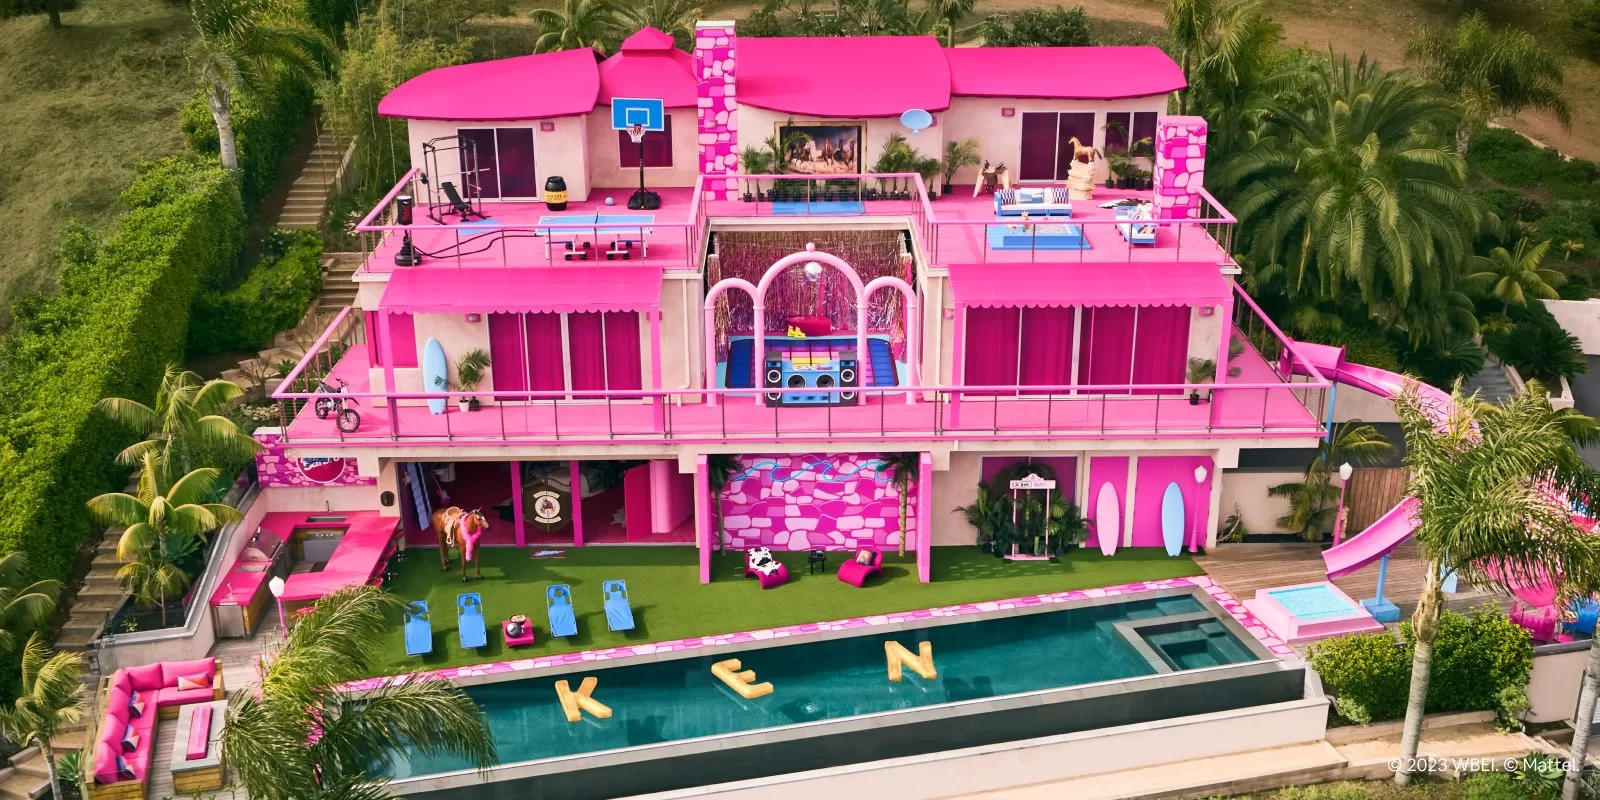 An image of the real-life Barbie DreamHouse, a bright pink mansion in Malibu that is being offered as an Airbnb rental for lucky guests.